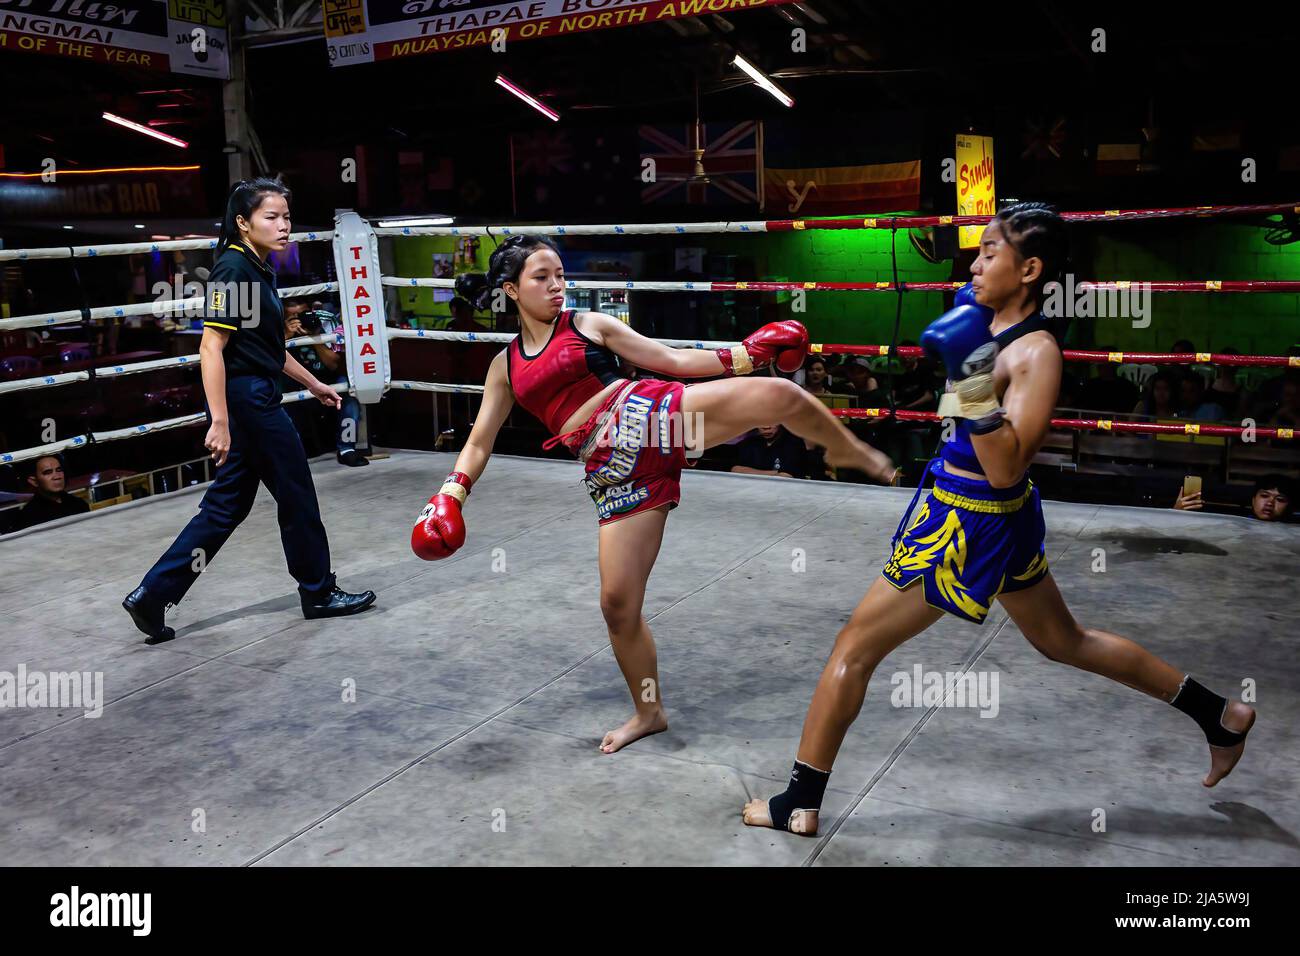 Naem Peaw (L) kicks Waewdoa during combat at Thaphae International Boxing stadium. Years ago seeing women in a ring fighting (Muay Thai) in Thailand was almost unheard of, unless it was in a ceremonial fight in the local temple during the festive season. Nowadays, things are changing and more women are joining the sport. The city of Chiang Mai is the epicentre of this change with the support of a local promoter that sees the sport as a way to promote equality, and the growing interest in the sport by foreigners flocking into the city.  In some Muay Thai gyms, women already overpass the number Stock Photo